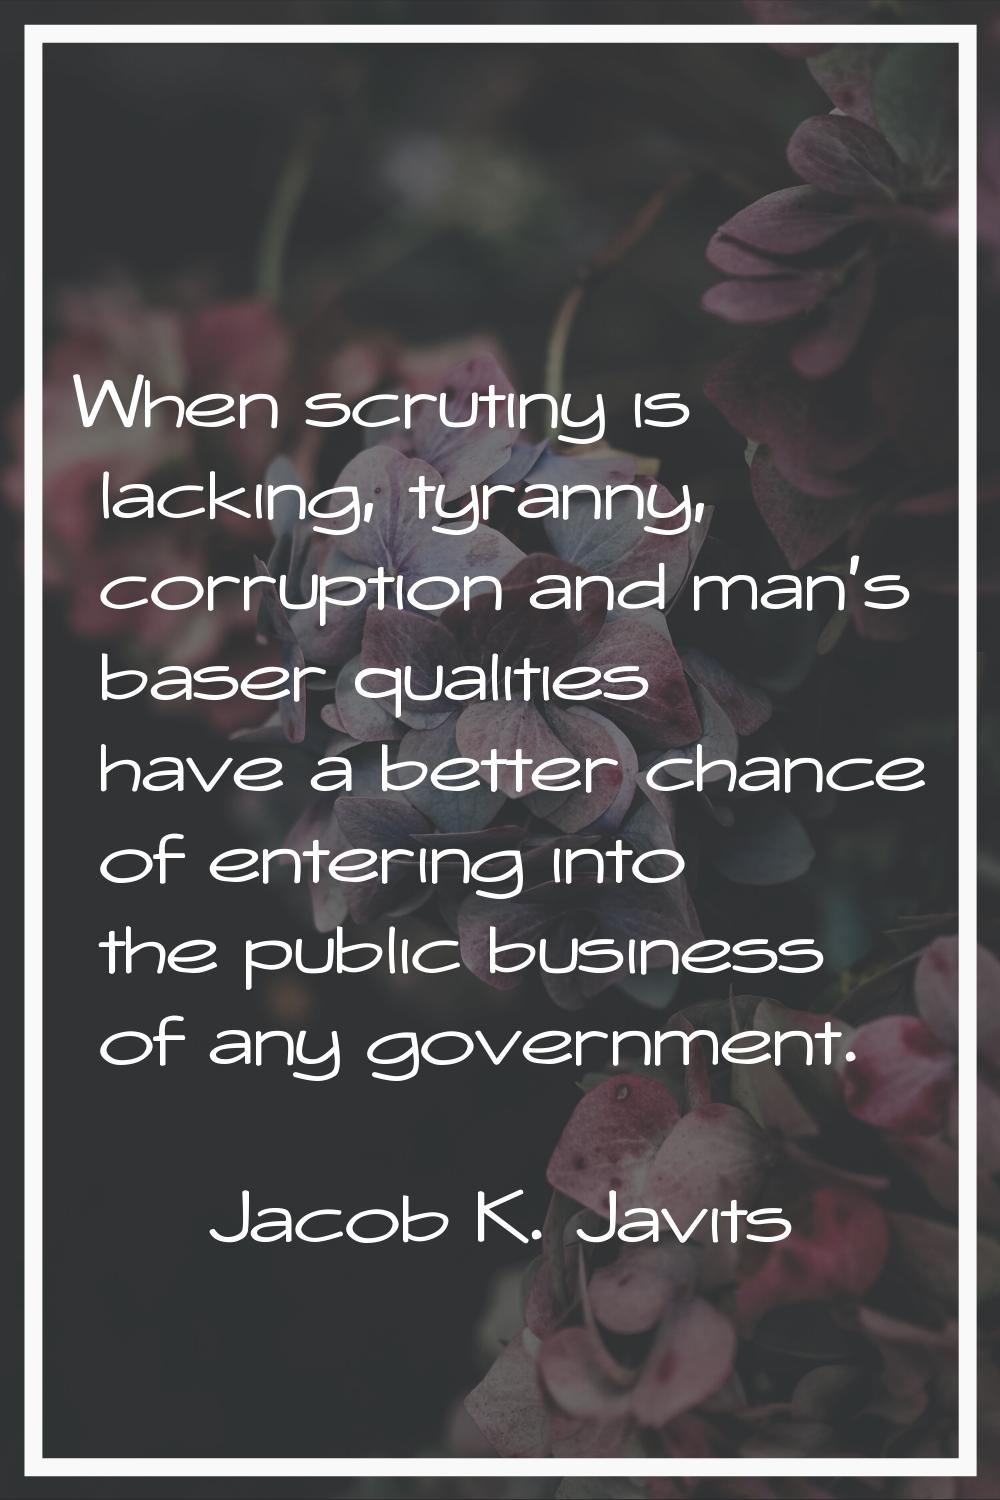 When scrutiny is lacking, tyranny, corruption and man's baser qualities have a better chance of ent